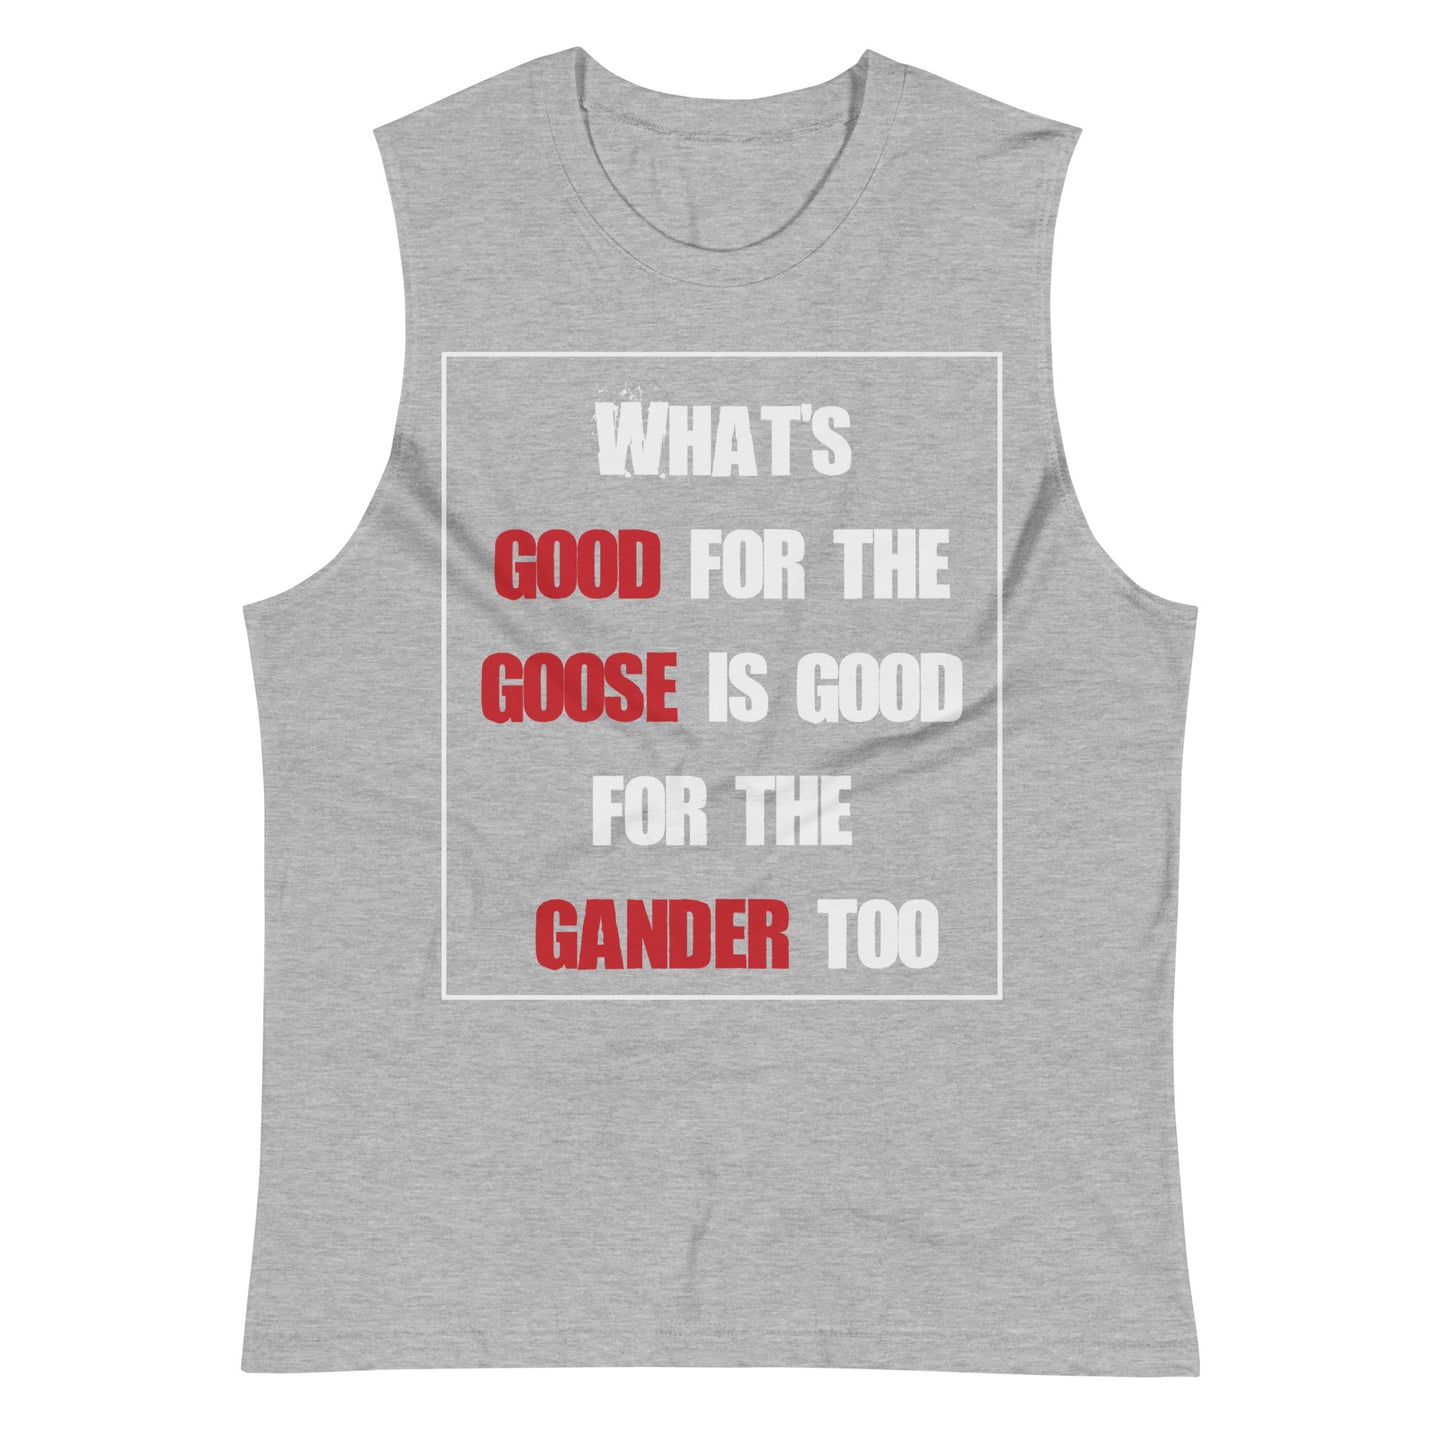 What's Good for the Goose is Good for the Gander Too / Unisex Muscle Shirt